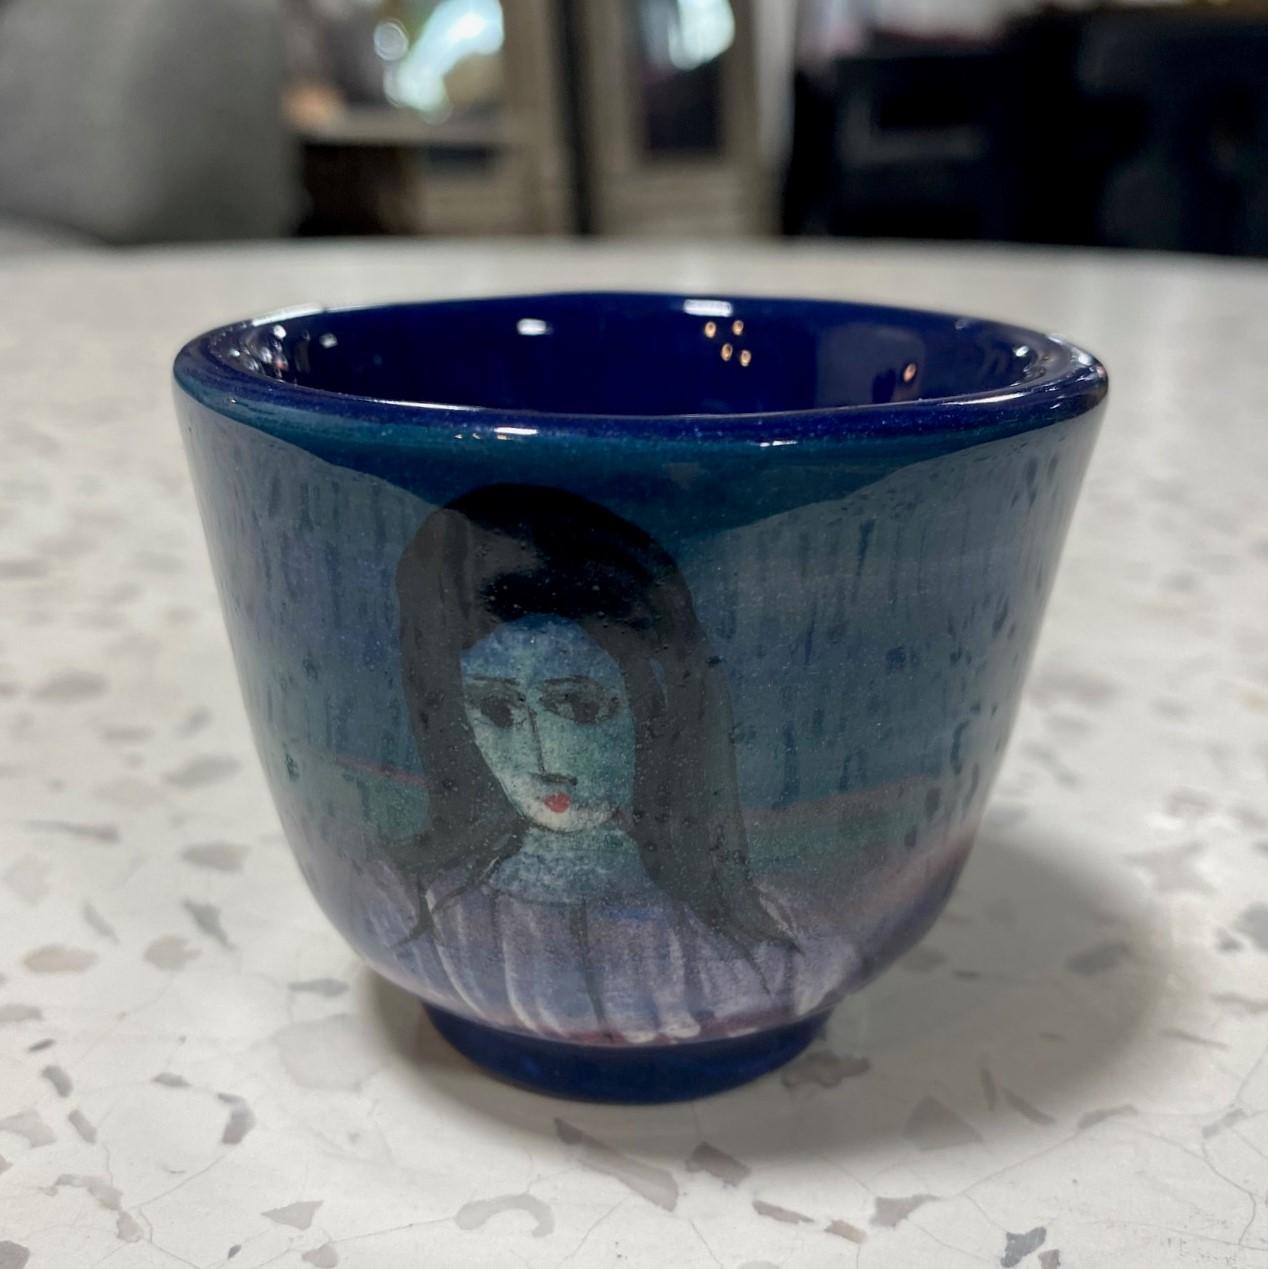 A wonderful, whimsical diminutive Yunomi tea cup by famed Polish-American master potter/artist Polia Pillin featuring a deep, rich cobalt blue glaze with streaks of green swirling around the cup body and hand painted female portrait figure.